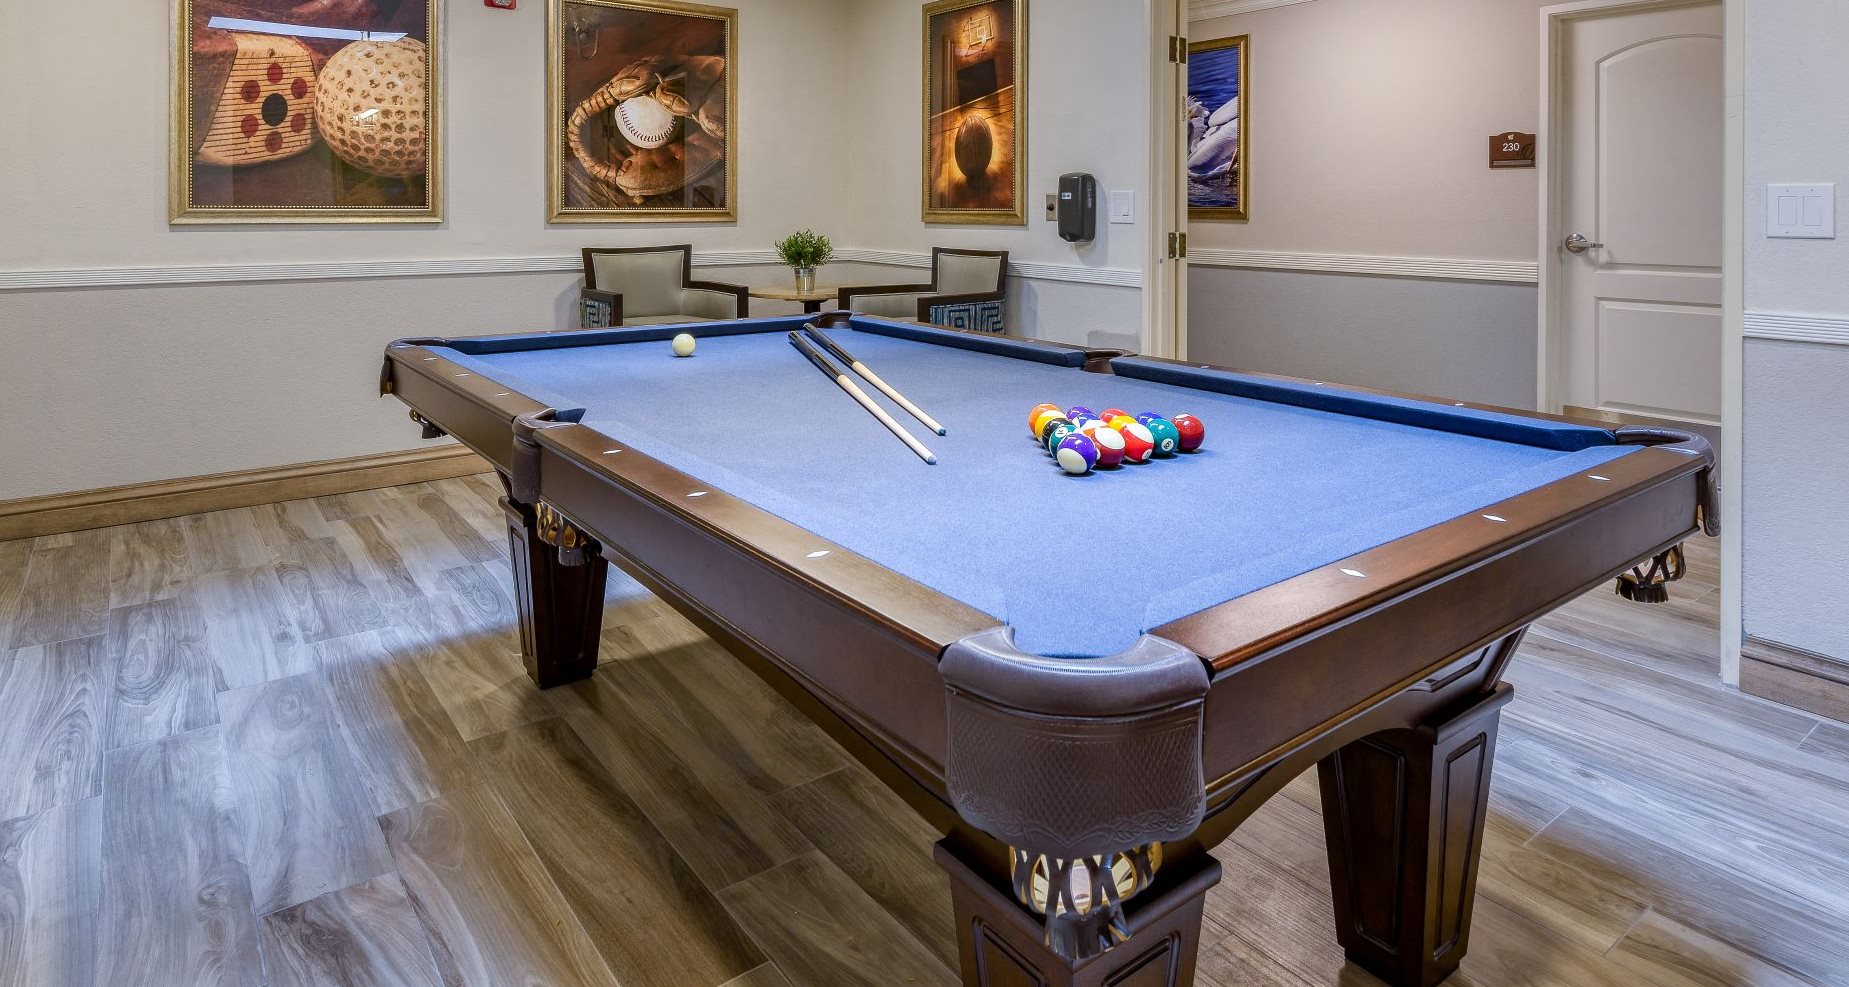 Enjoy a game of pool and so much more at Pacifica Alta Vista